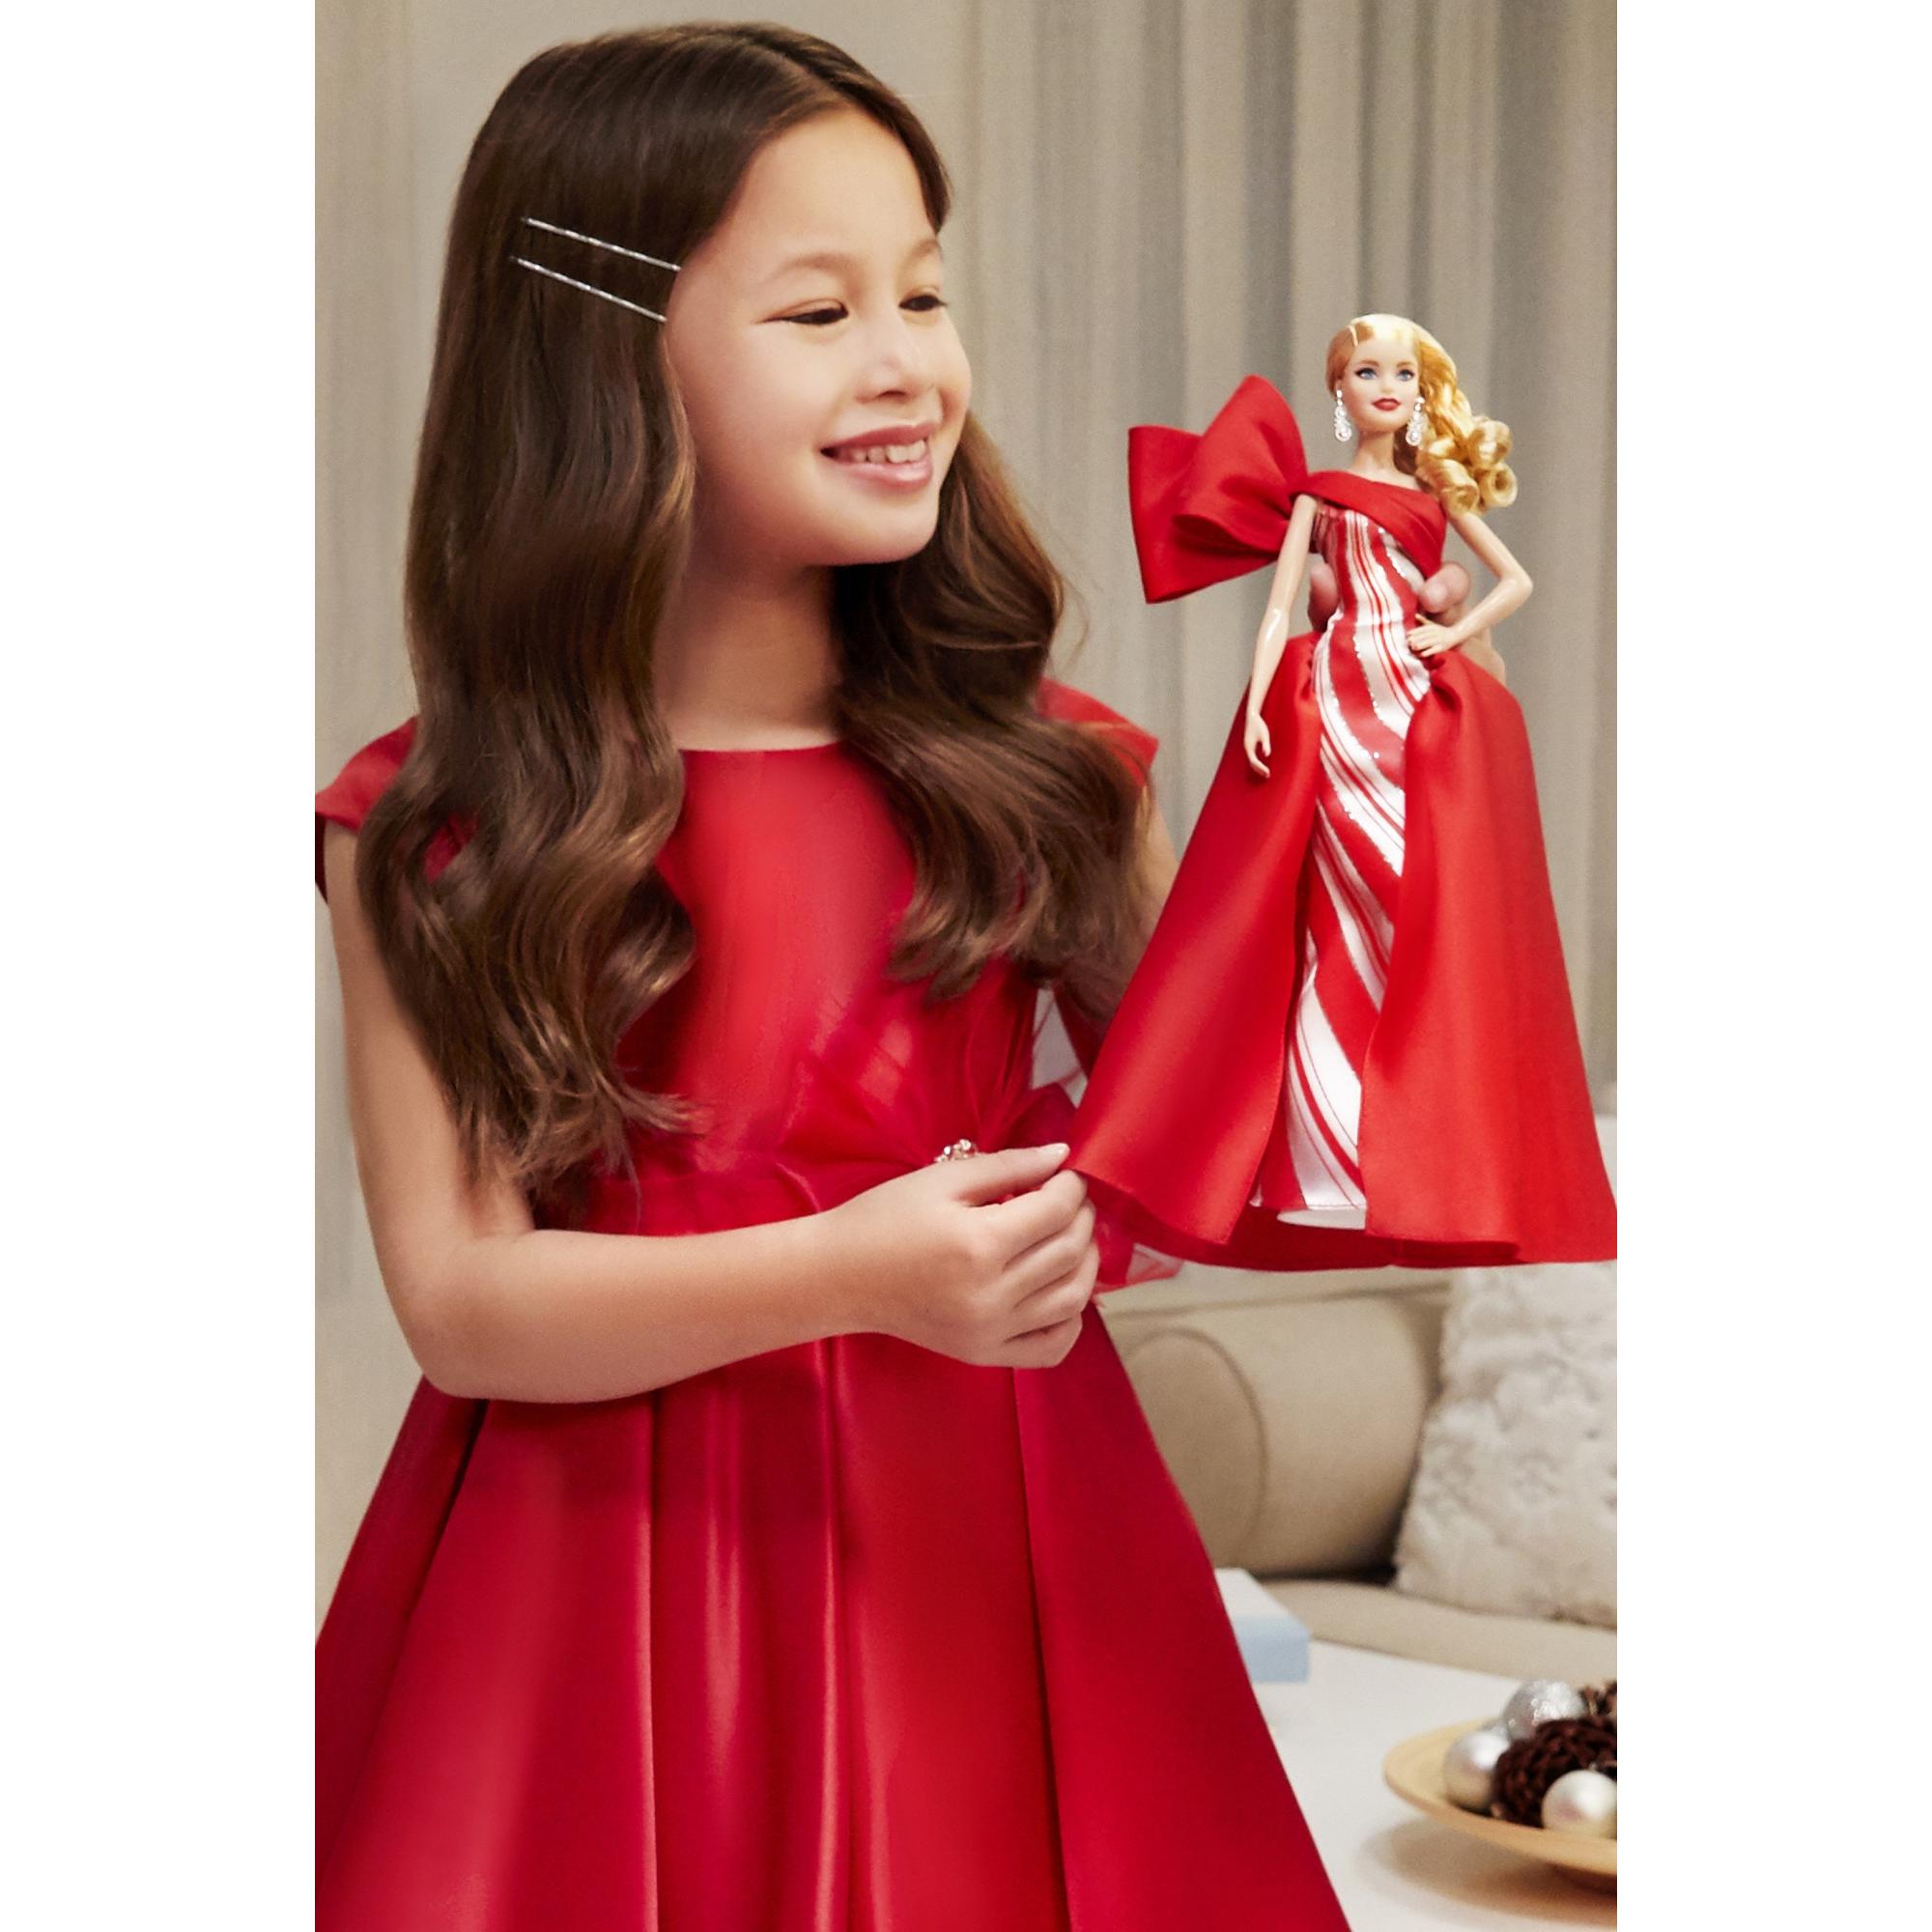 Barbie 2019 Holiday Doll, Blonde Curls with Red & White Gown - image 3 of 10